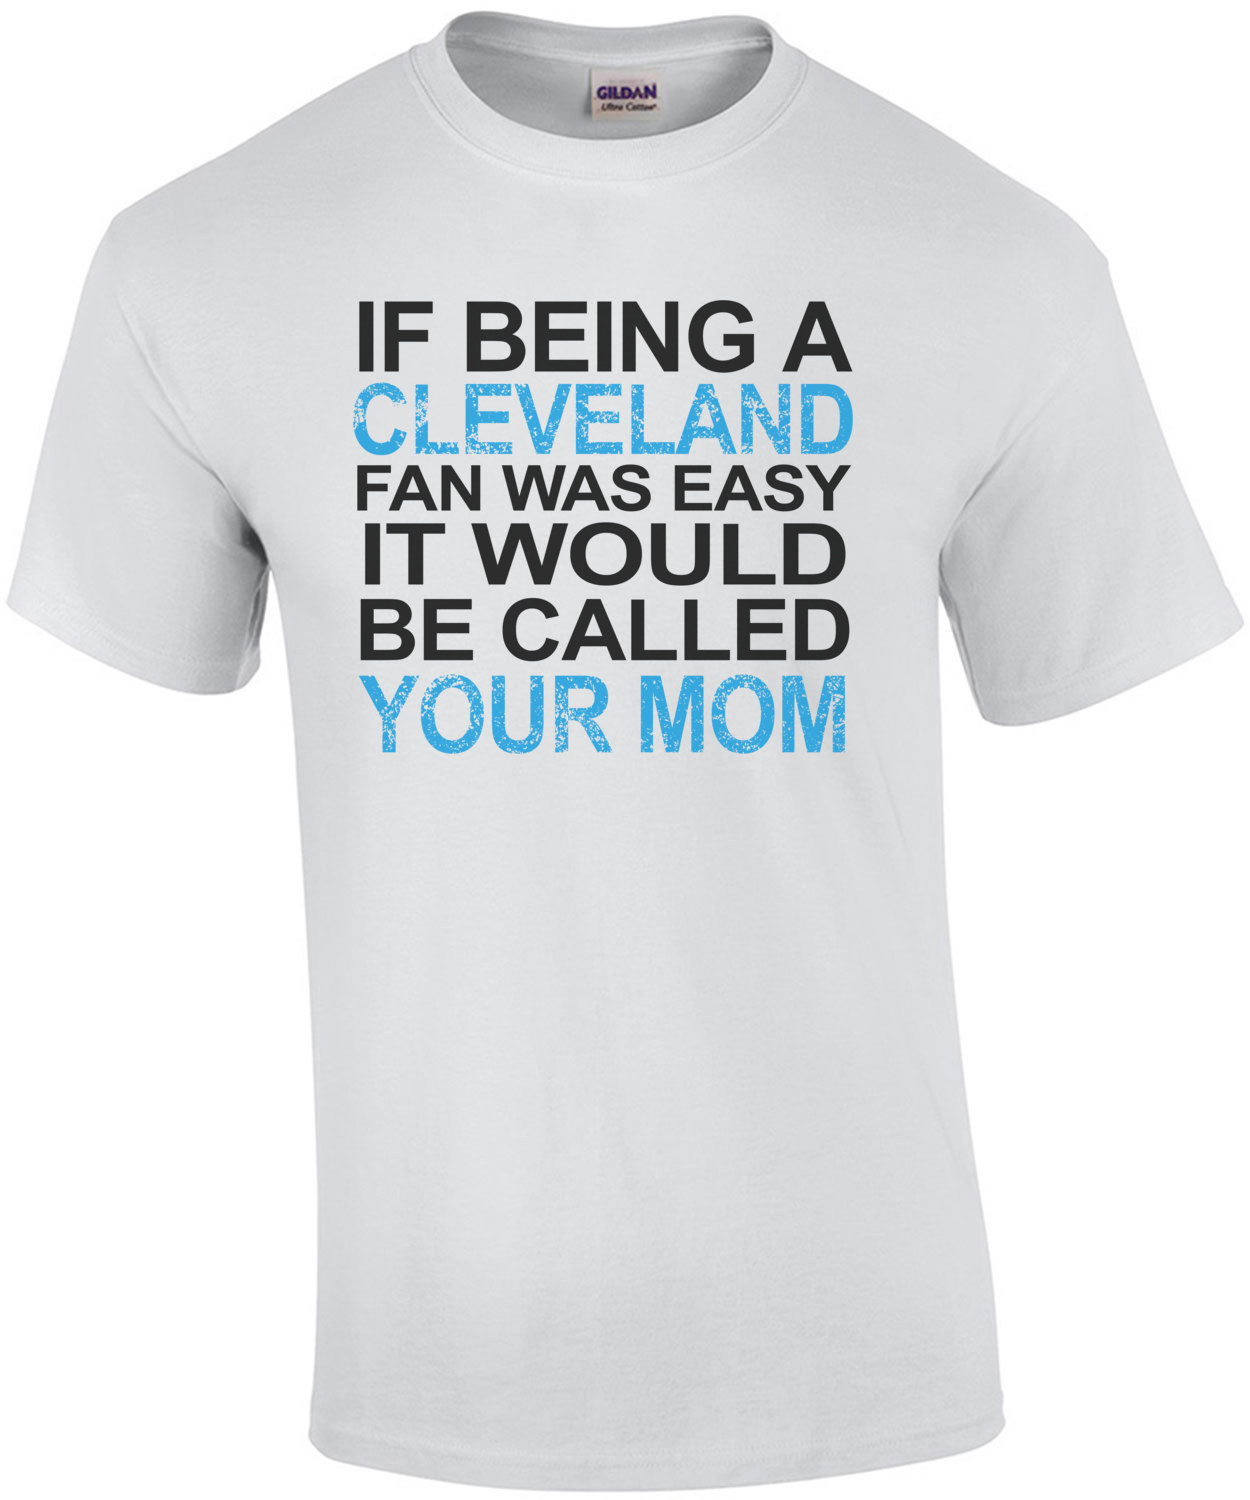 If Being A Cleveland Fan Was Easy It Would Be Called Your Mom T-Shirt